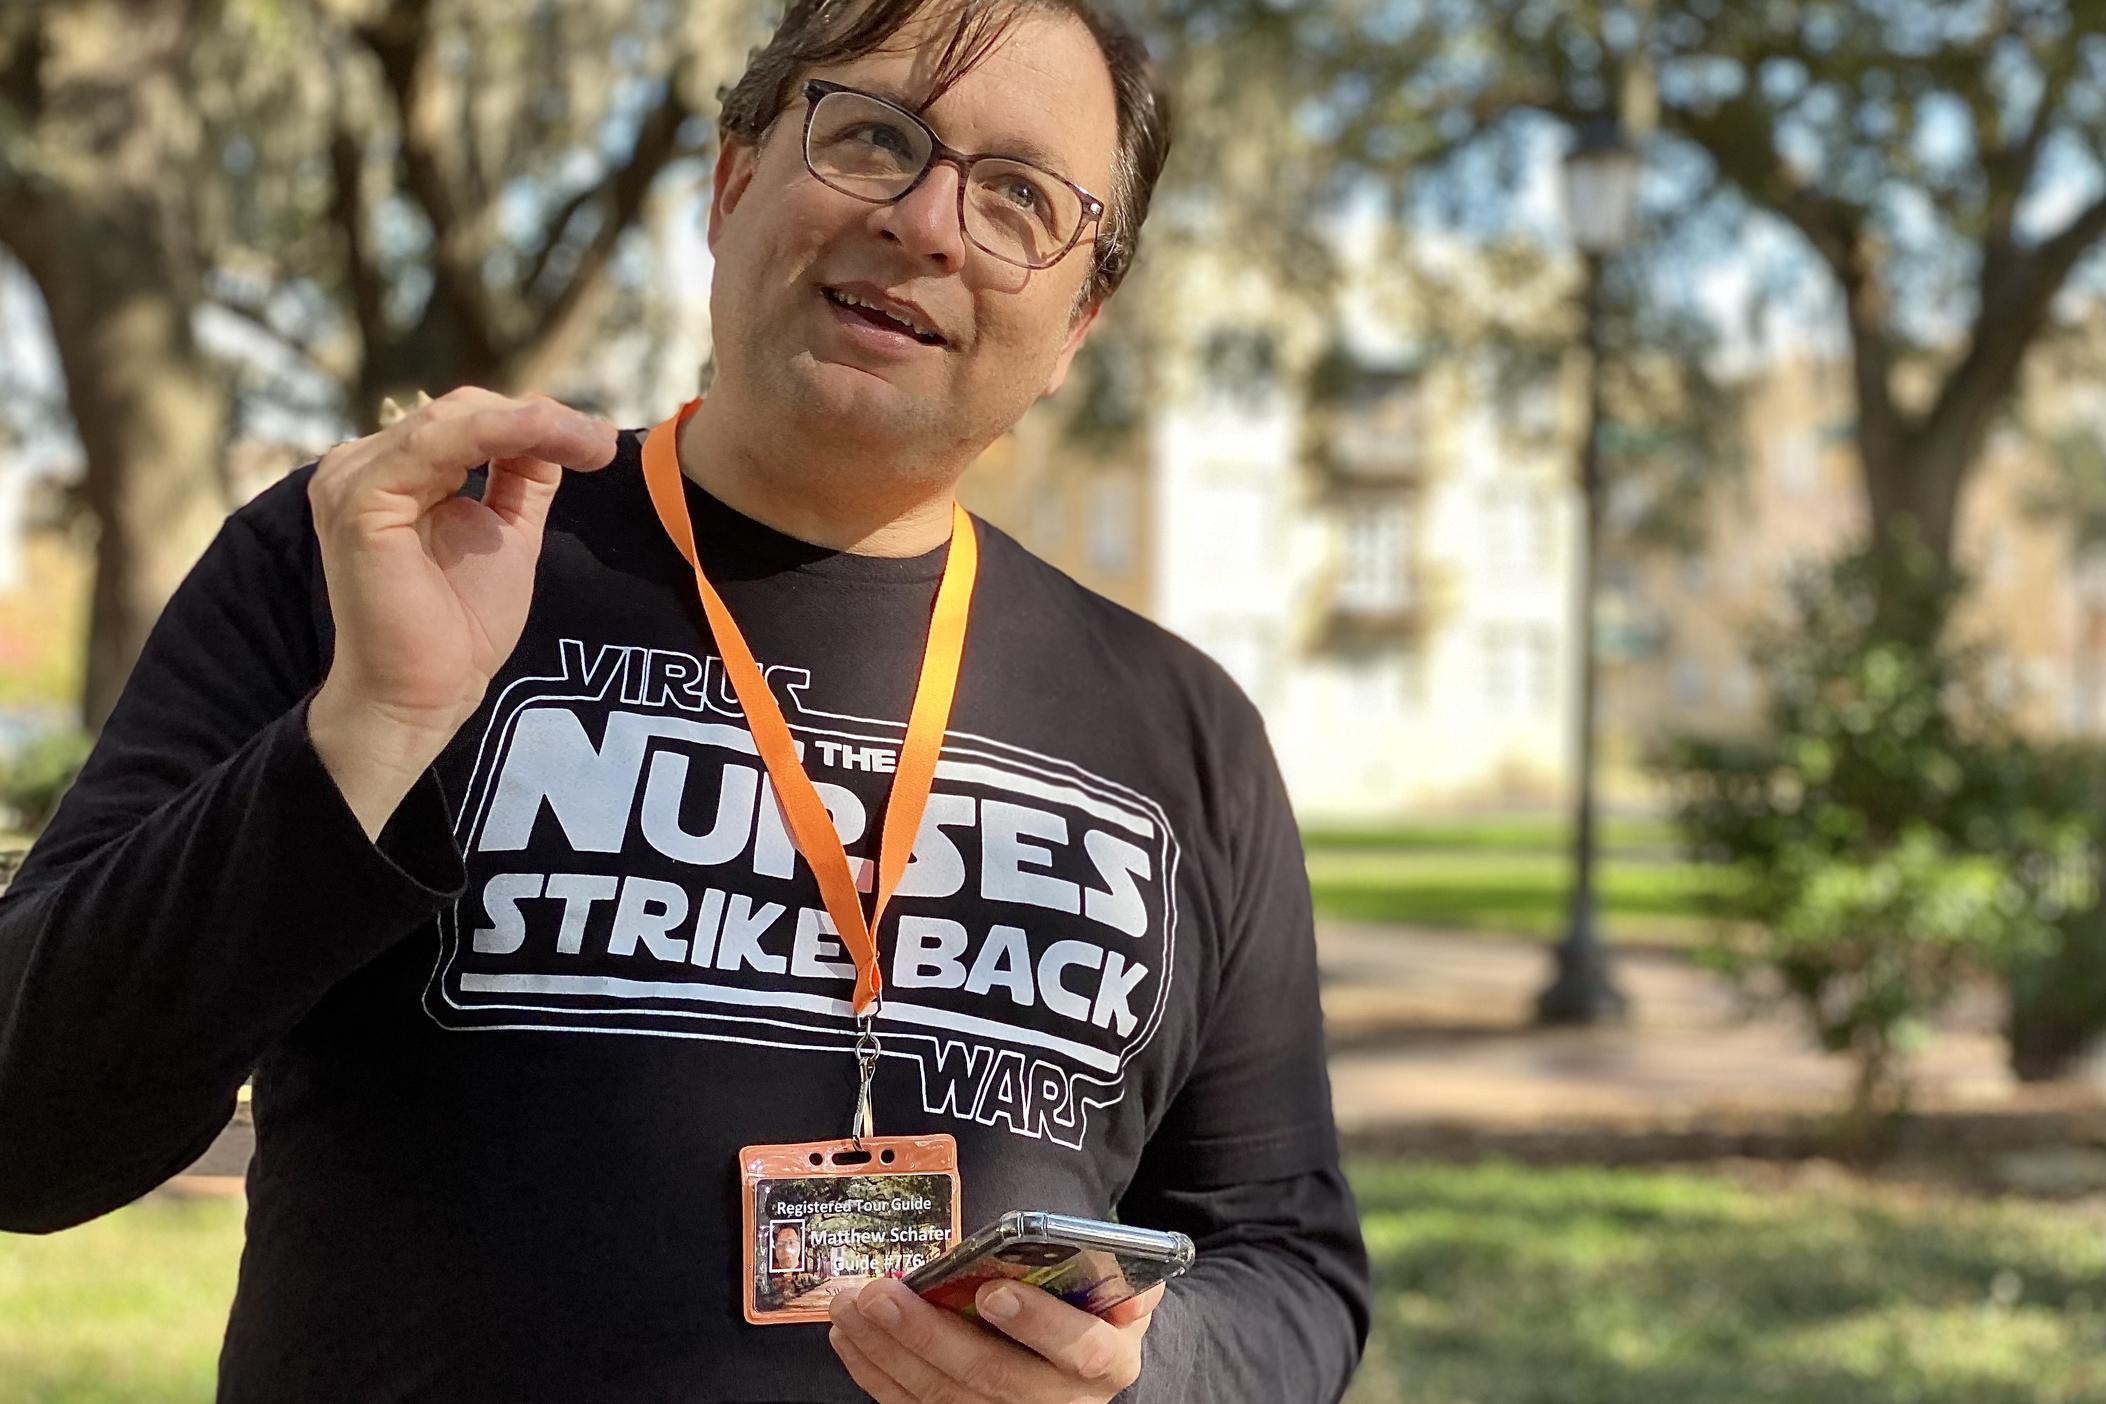 Matt Schafer gestures with his right hand in a park while leading a walking tour about Savannah's medical history. He is wearing a black long-sleeve T-shirt with text that reads “Virus Wars: The Nurses Strike Back.” Around his neck is an orange lanyard that is holding a tour guide identification card.